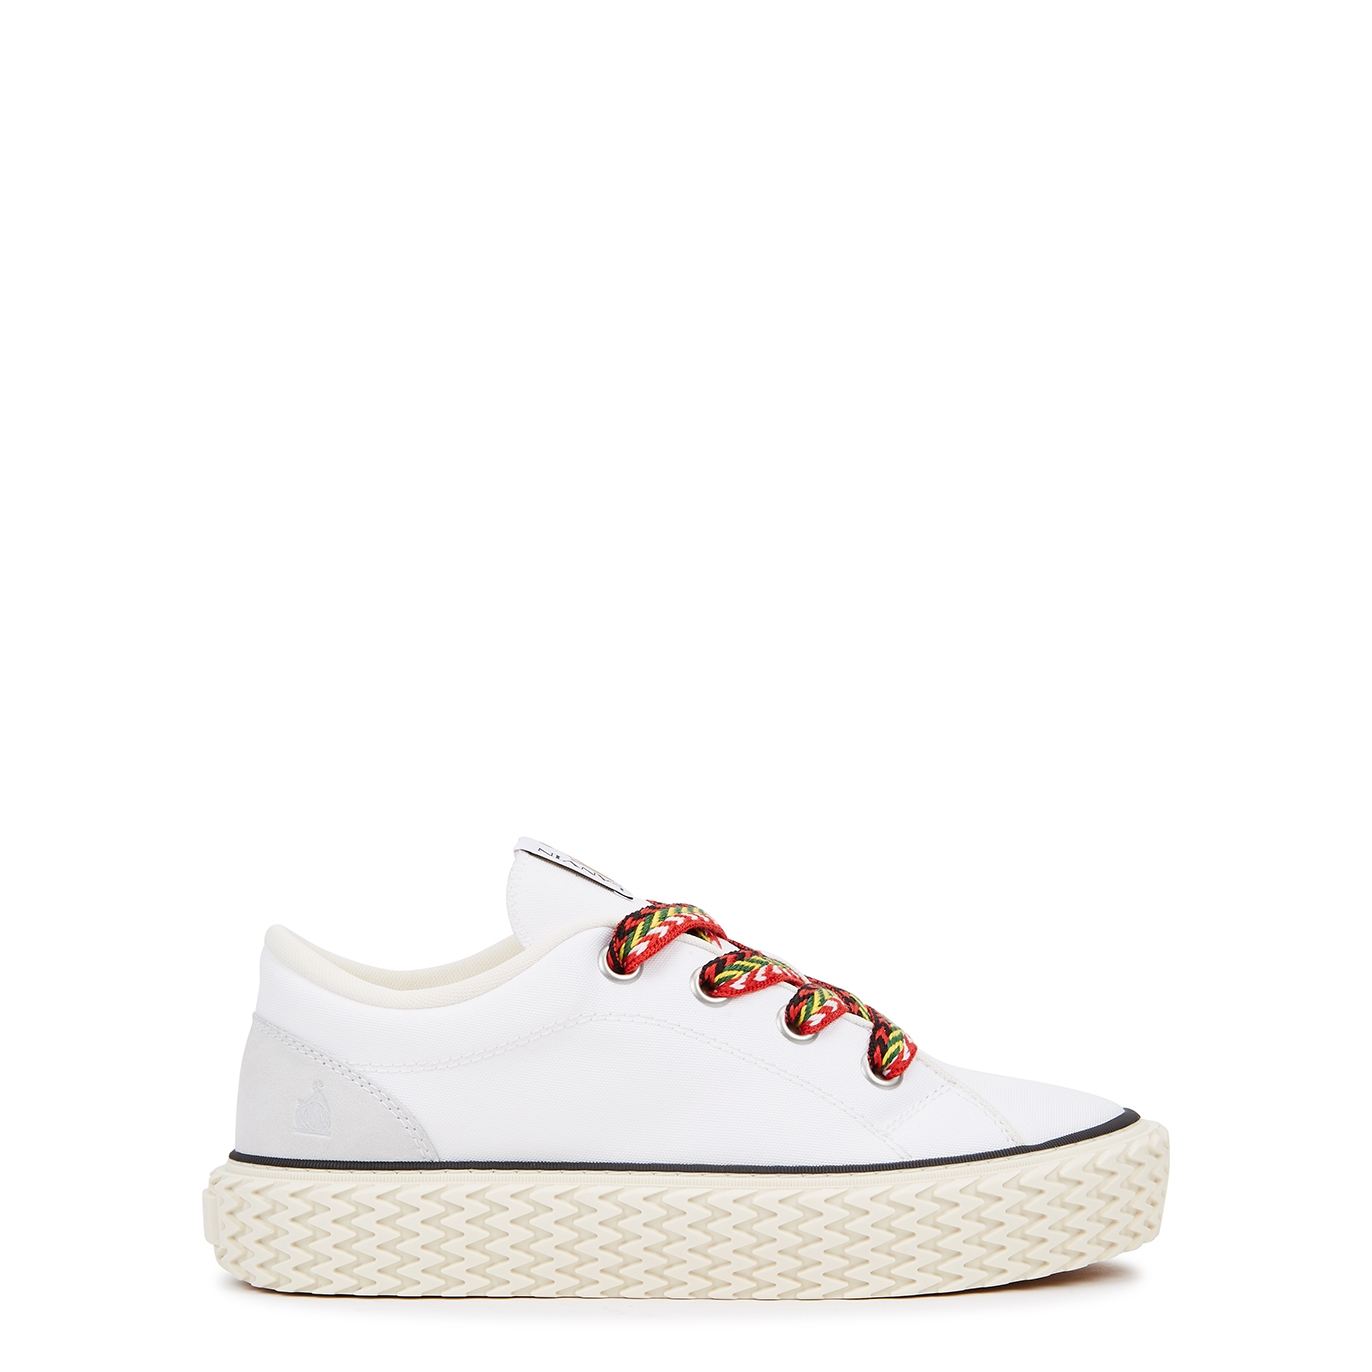 Lanvin Curbies White Canvas Sneakers - 11